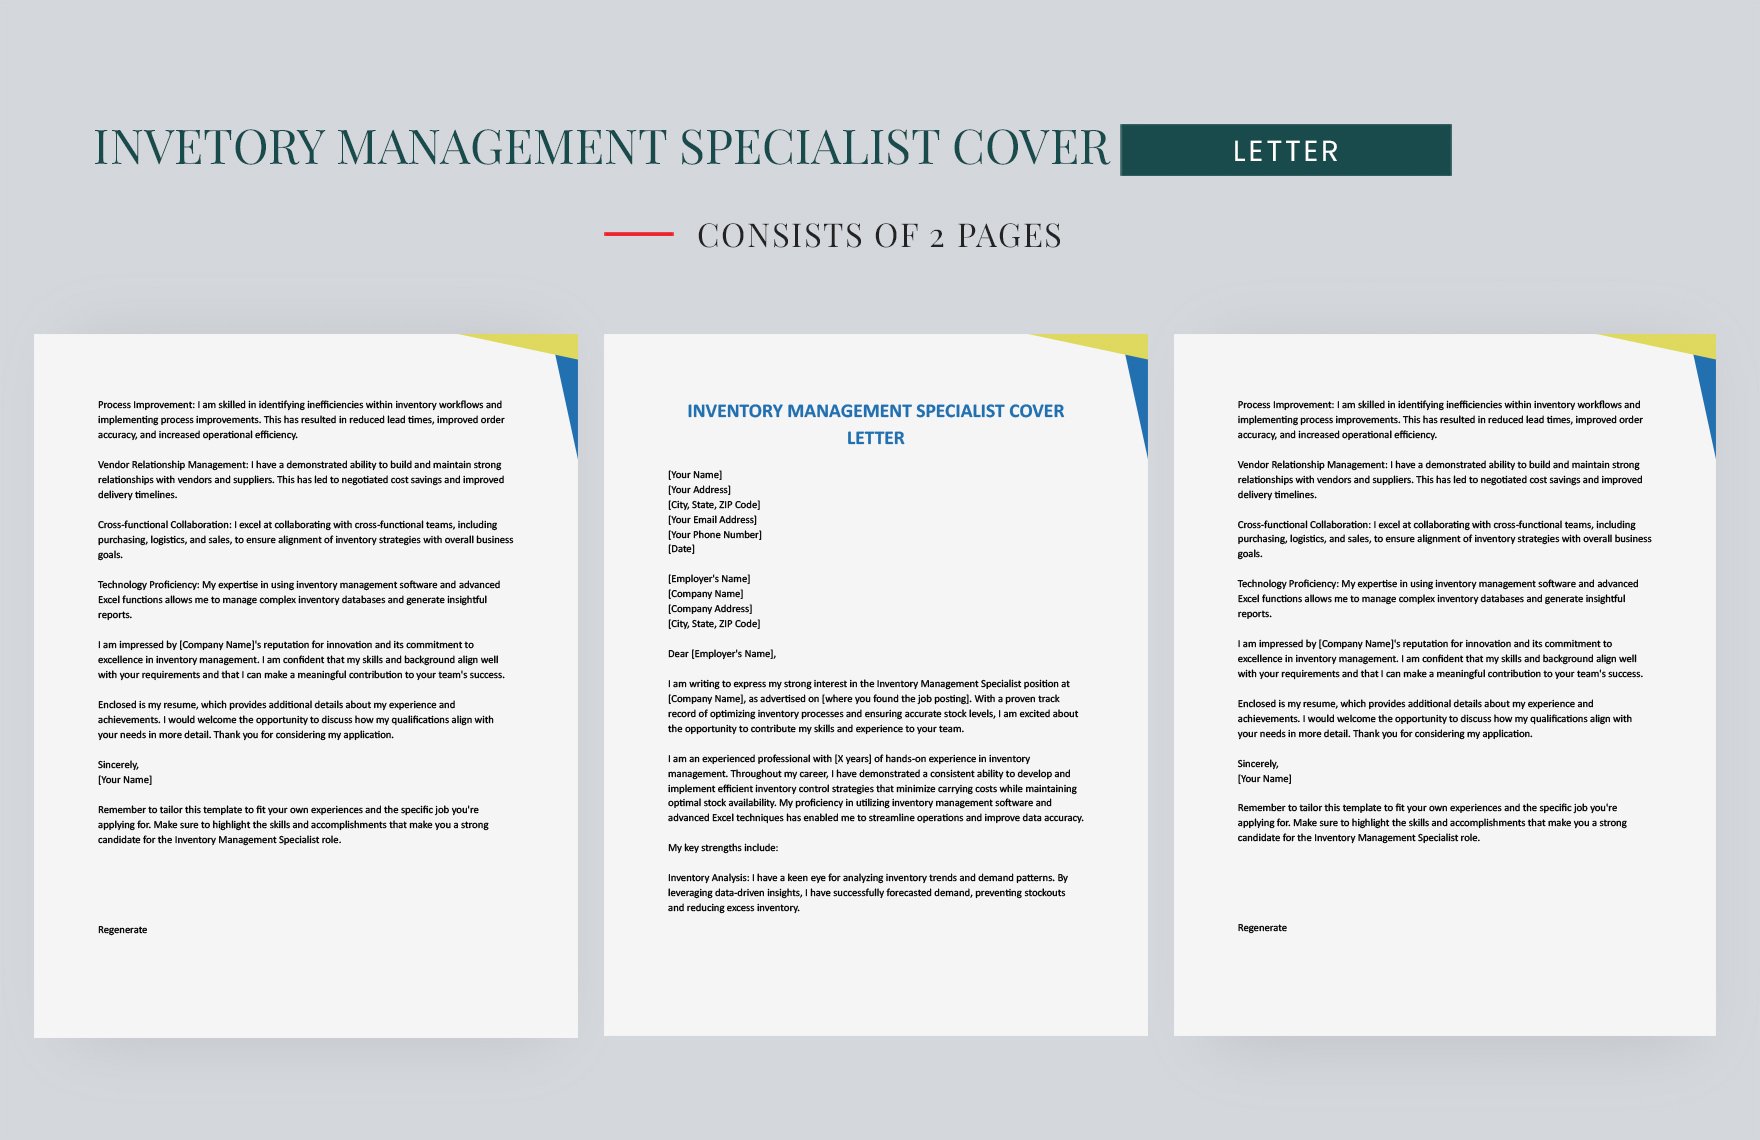 Inventory Management Specialist Cover Letter